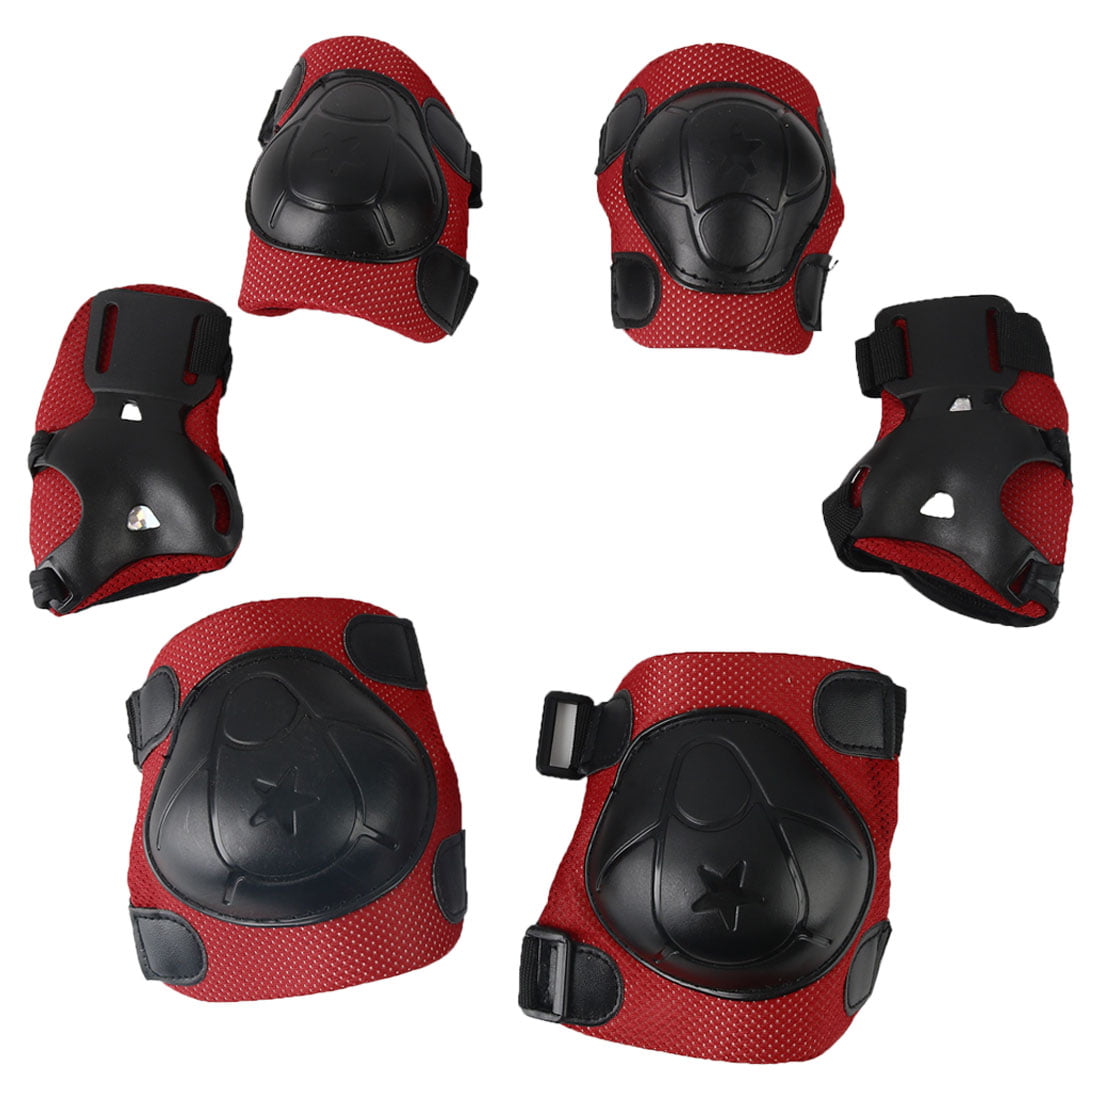 Details about   6PCS Kids Protective Gear Knee Pads Elbow Wrist Roller Skating Safety ProtXNJI 